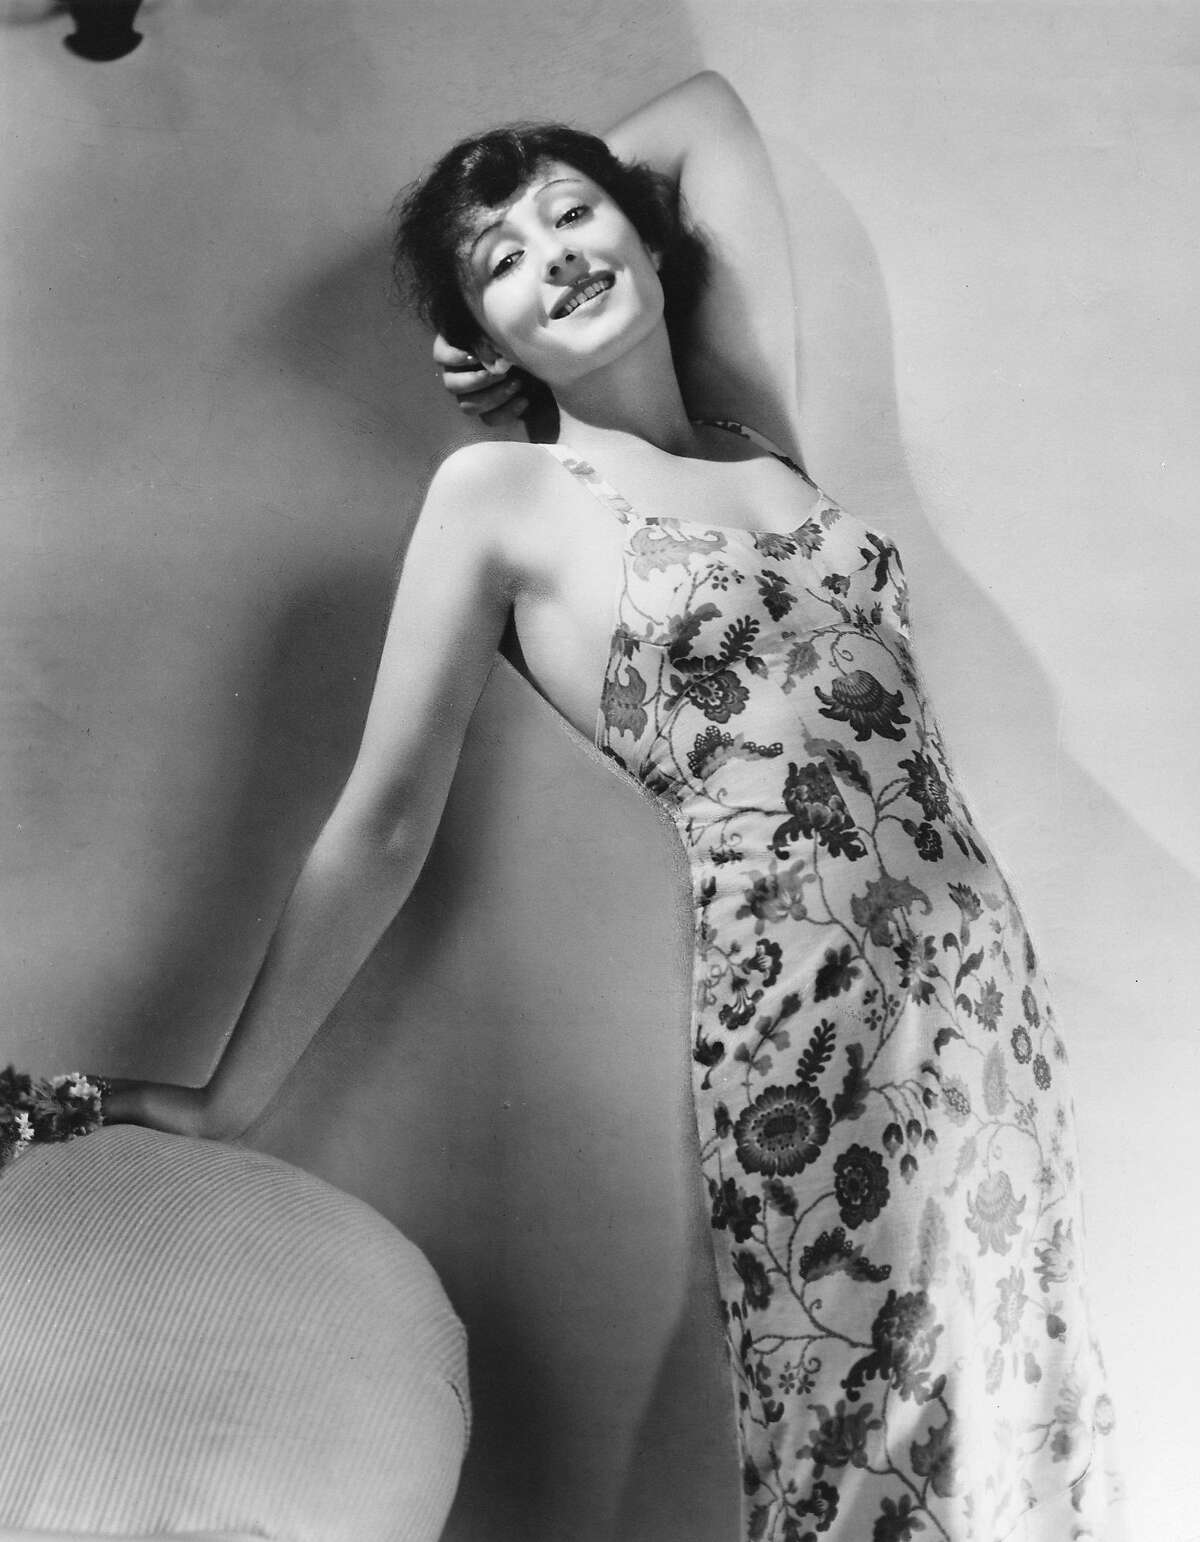 Actress Luise Rainer had died at the age of 104 on December 30, 2014. German actress Luise Rainer wearing a floral print summer dress, circa 1937. Her latest movie is 'The Good Earth'. (Photo by George Hurrell/MGM/Margaret Chute/Getty Images)